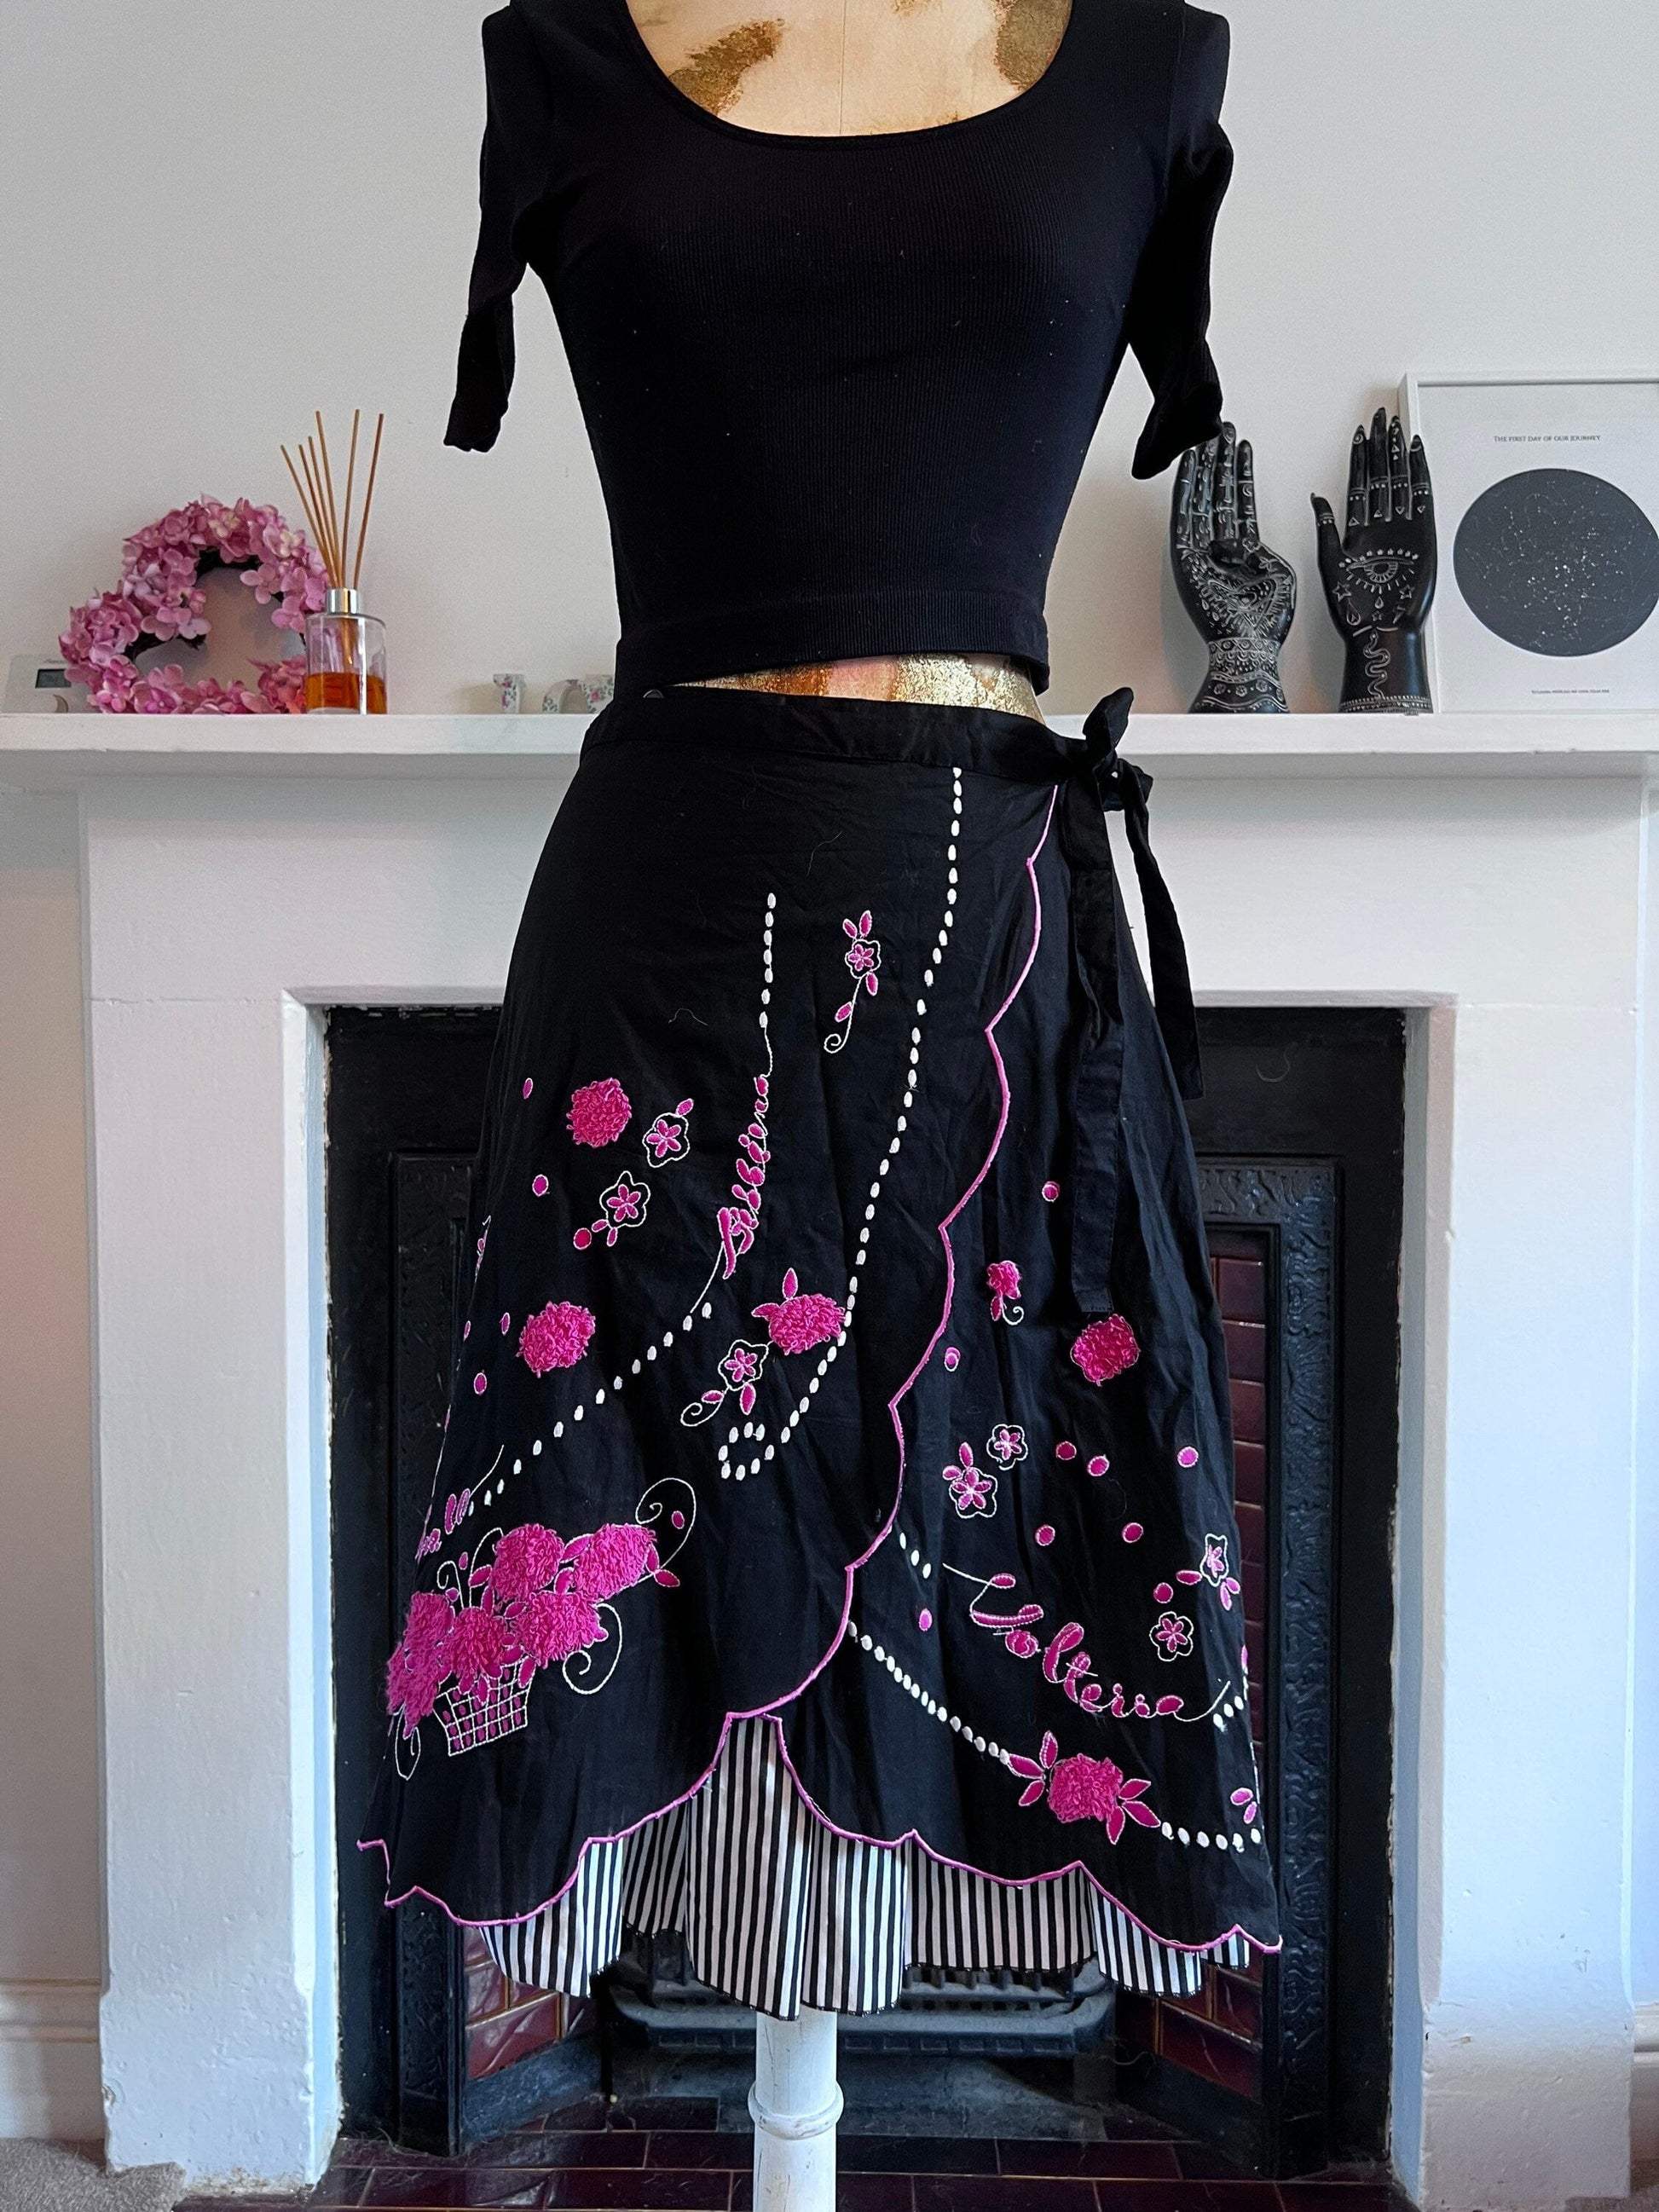 Vintage Black Floral Skirt with Flap over skirt in contrast design by Persaman of New York 100% Cotton US10